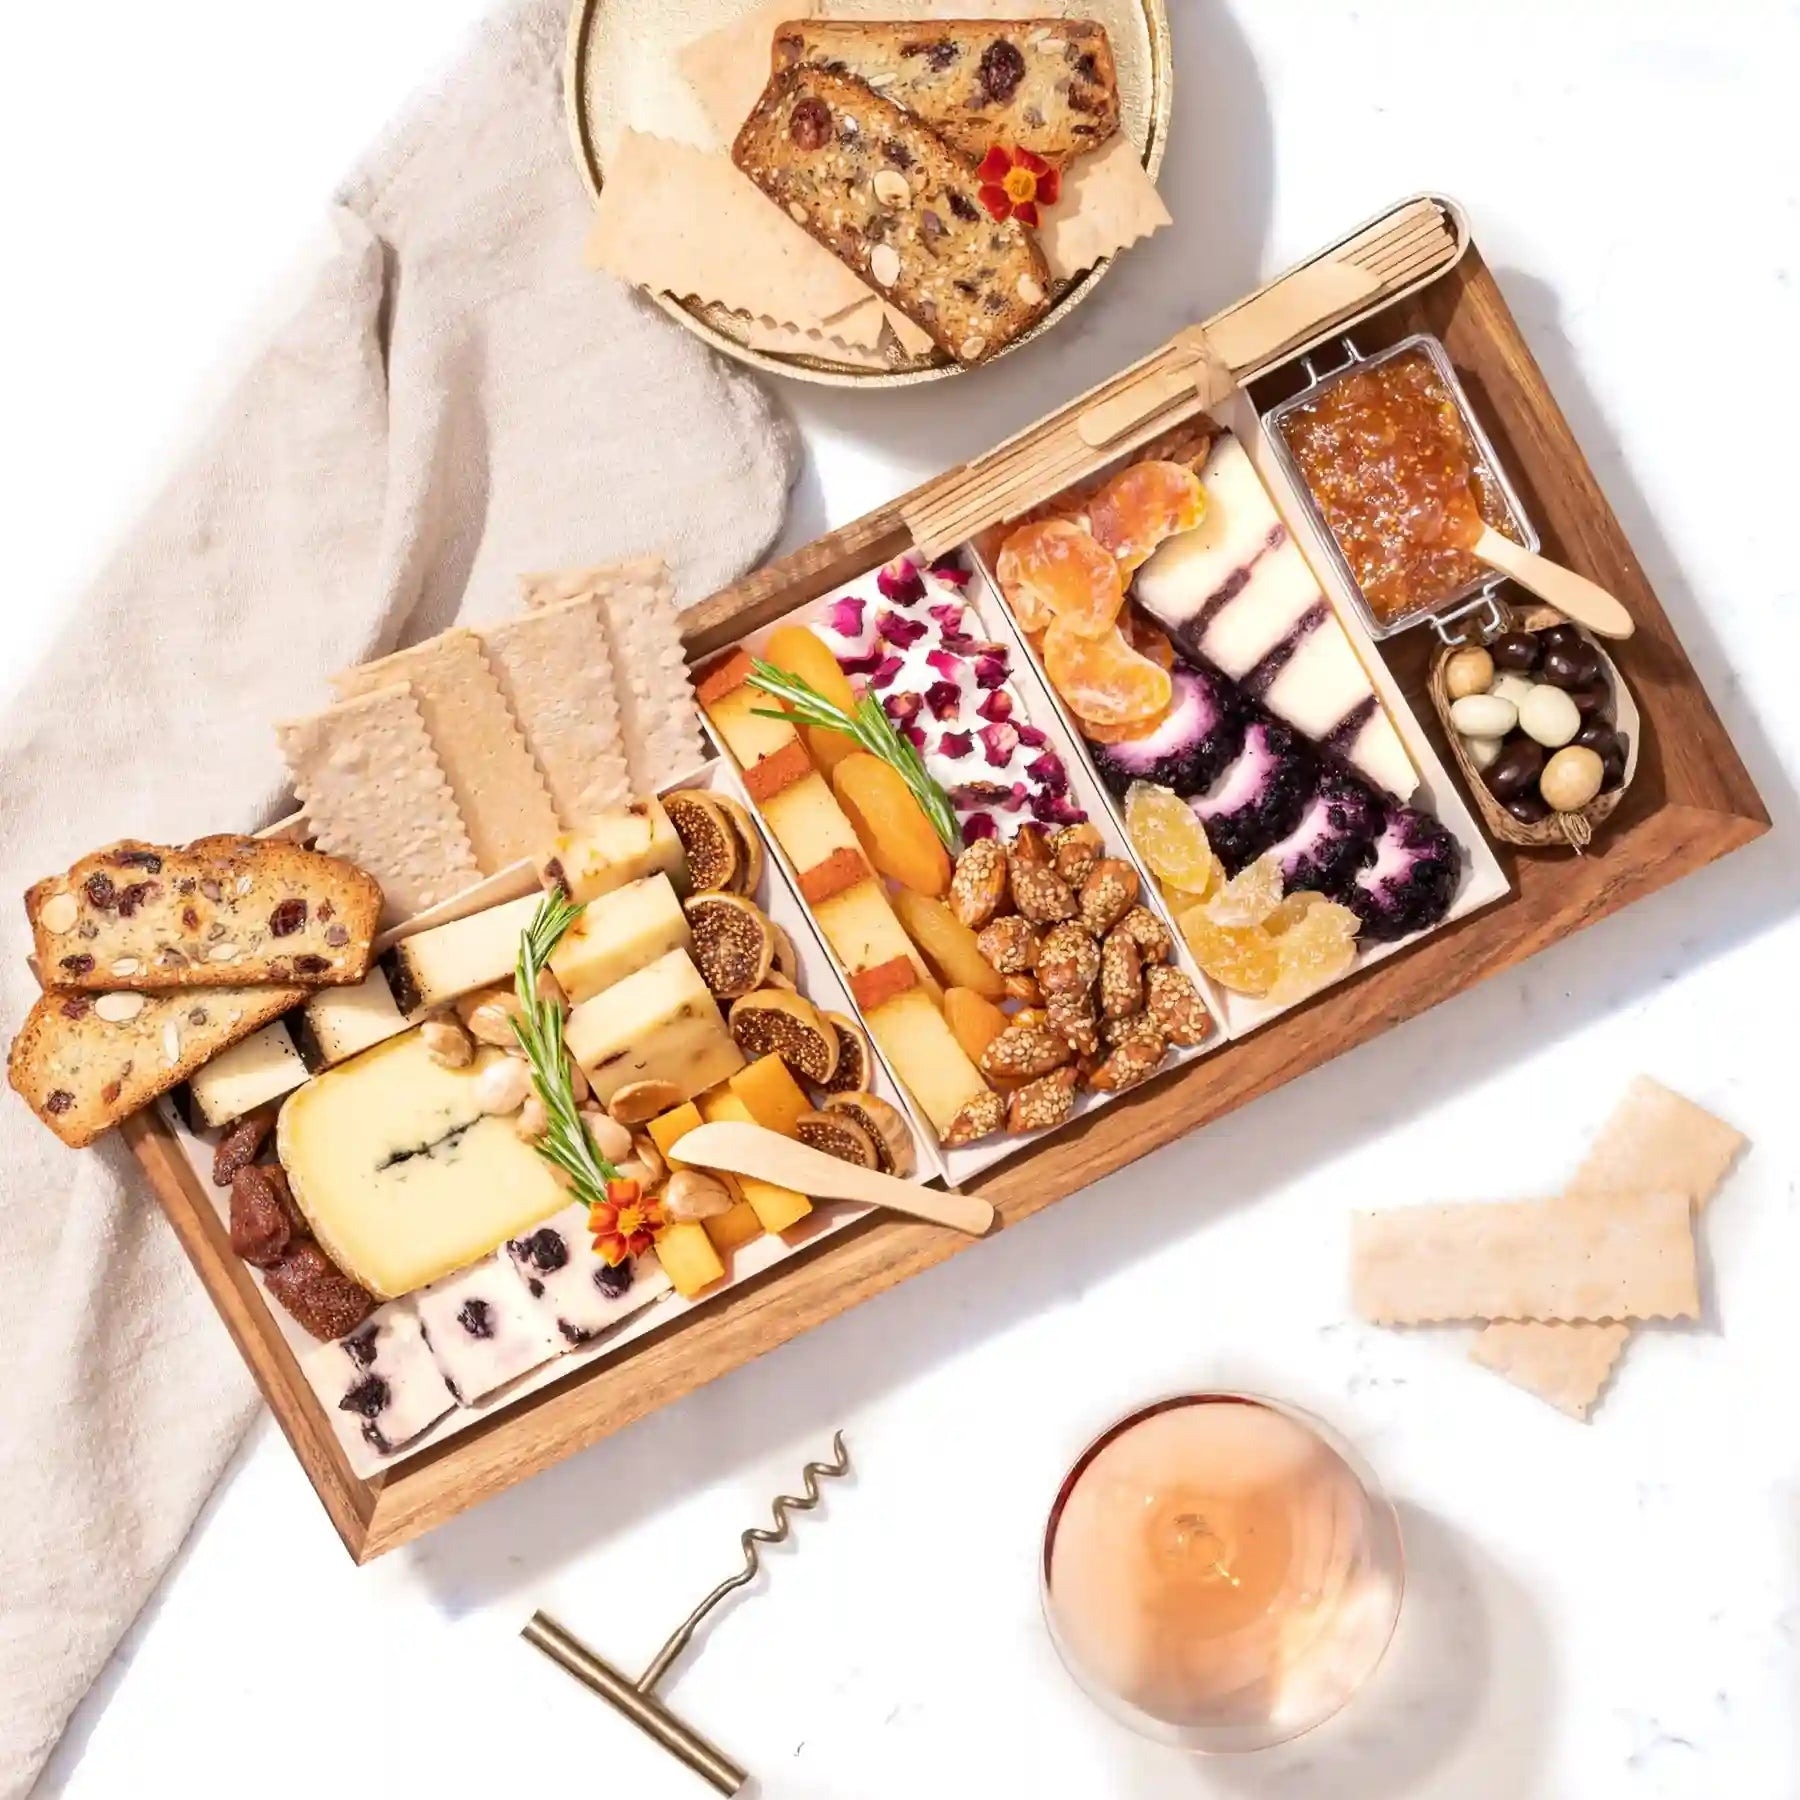 Cheese board with various cheeses, honey, nuts, fruits, and crackers for stylish serving ideas